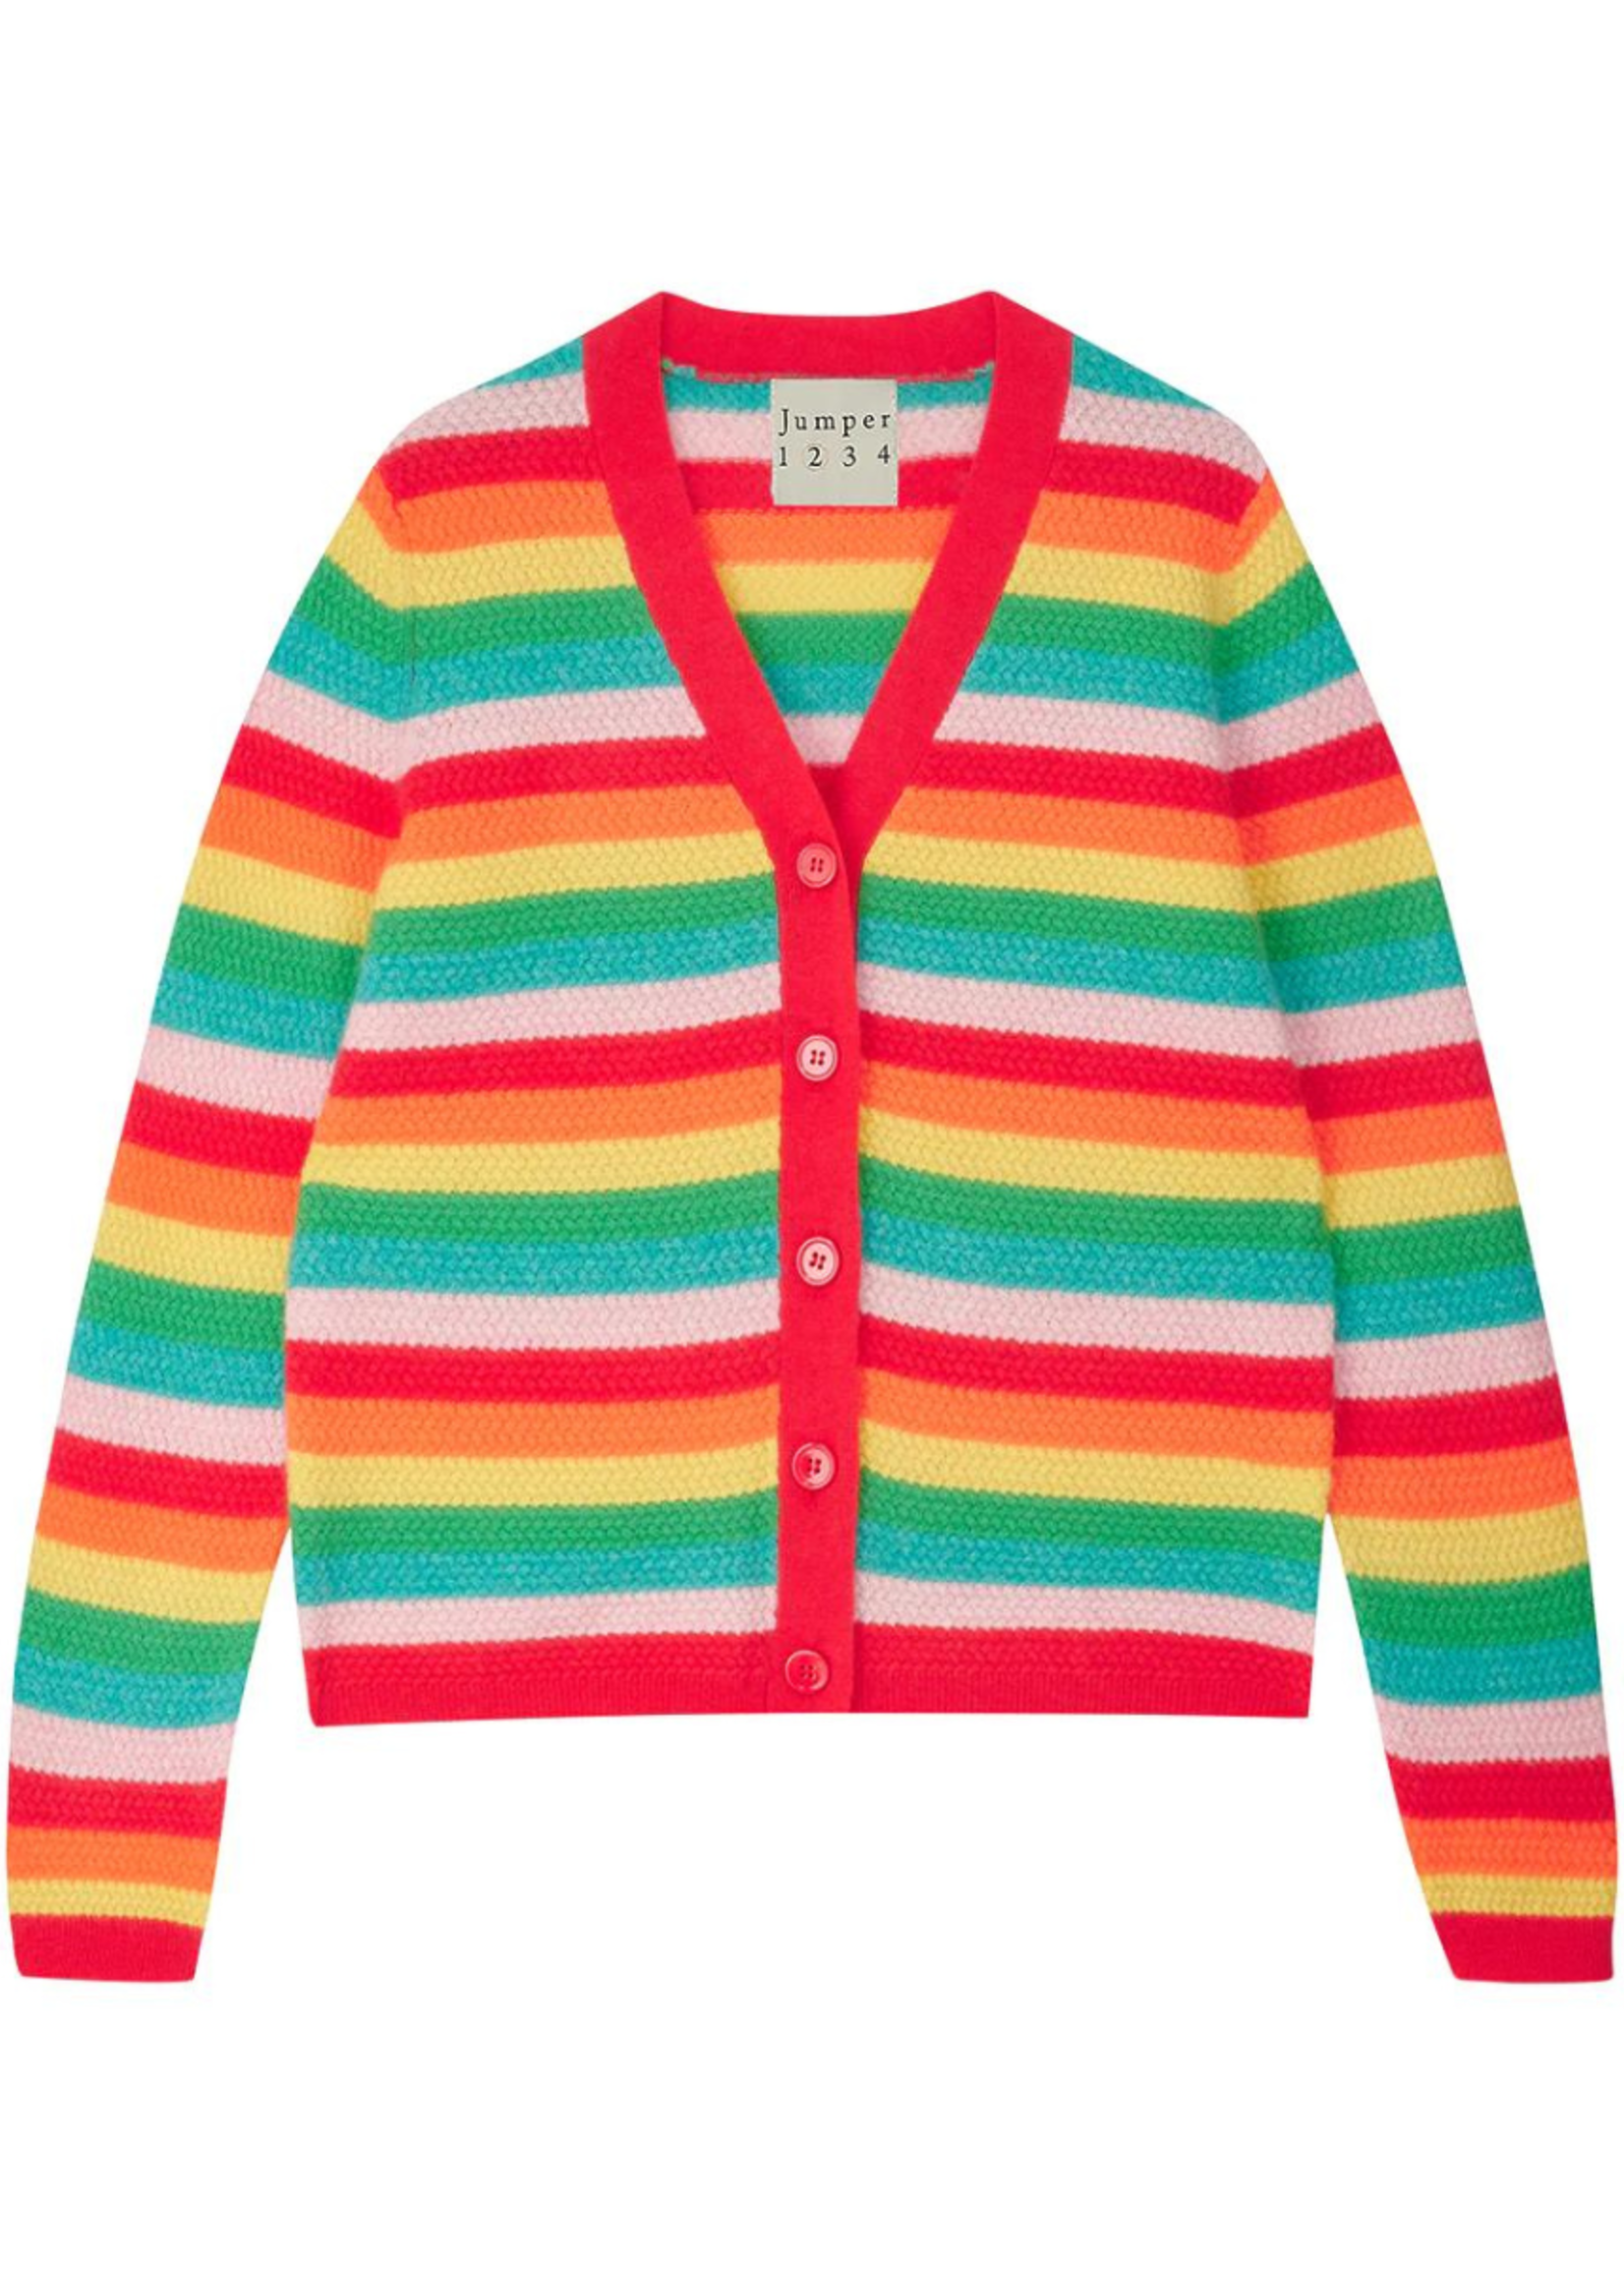 Multicolor Knit Sweater Personalized Sweater Woman Rainbow 